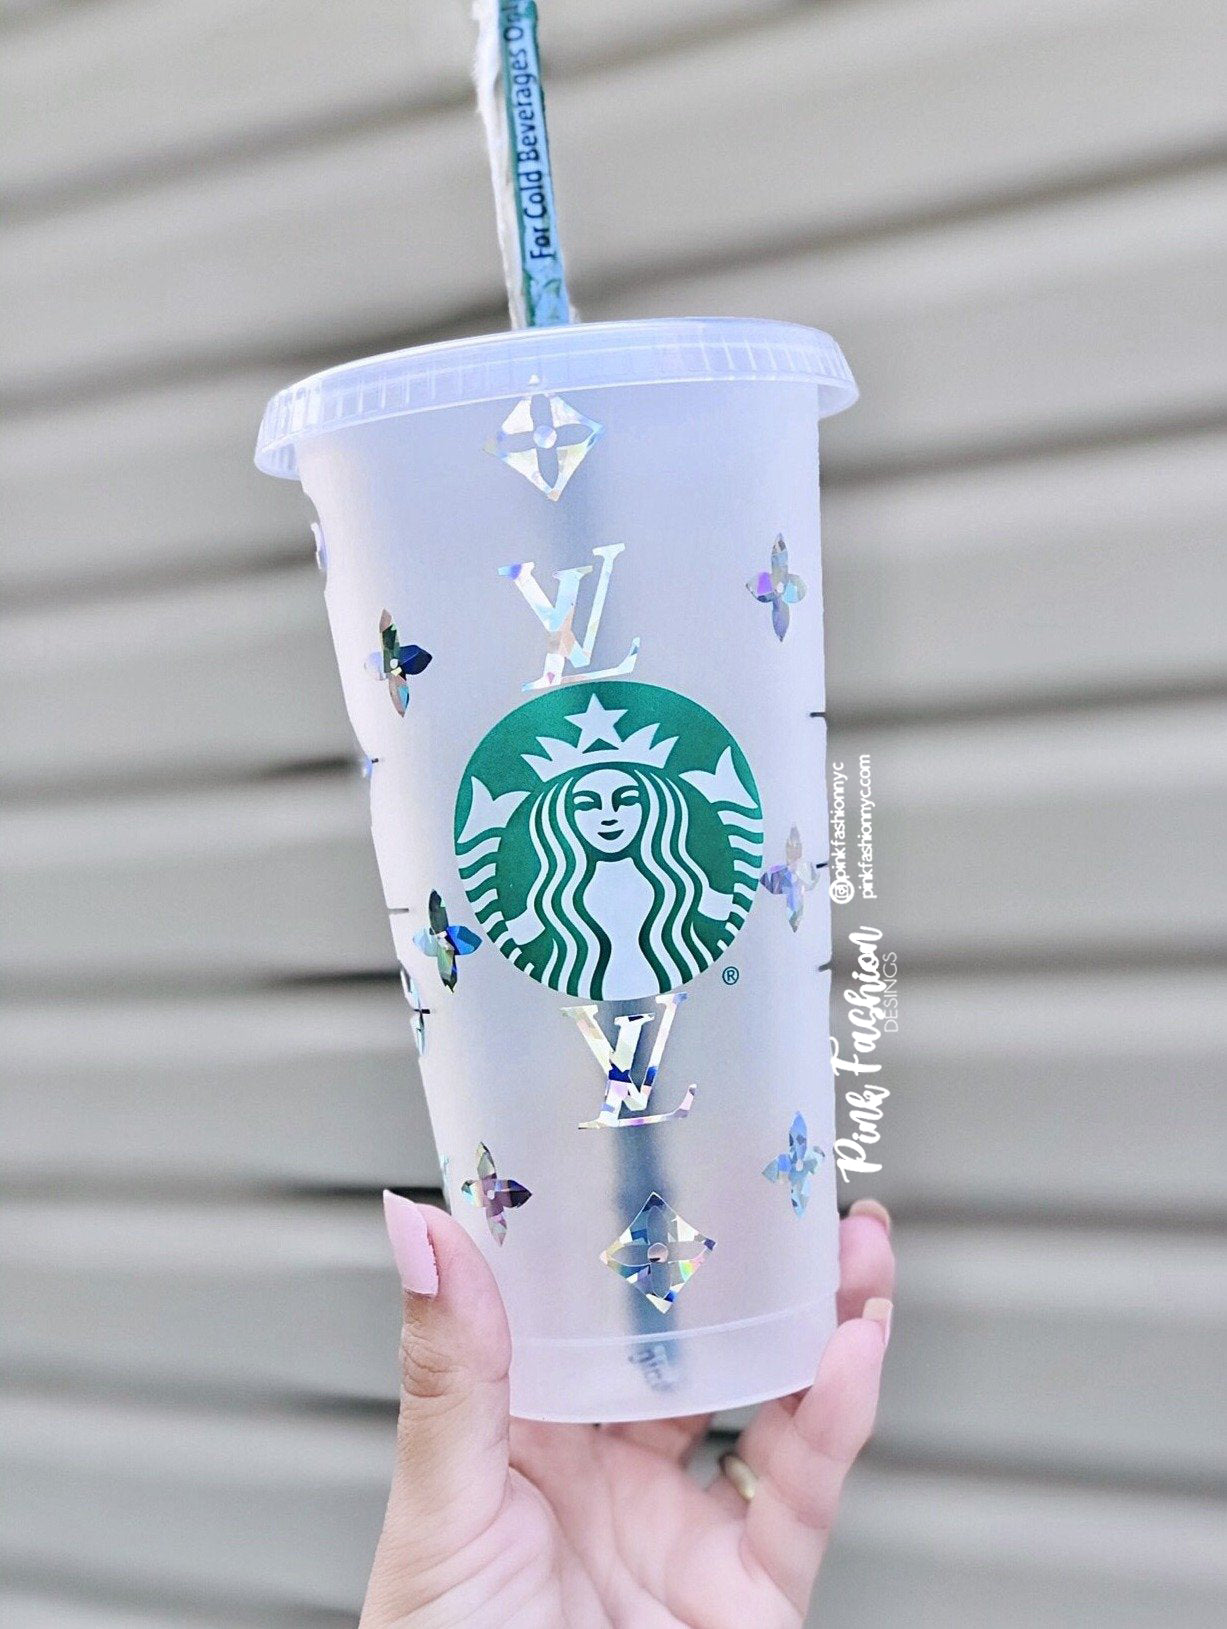 Pink Fashion Nyc - Our best seller Lv inspired Starbucks Cup in